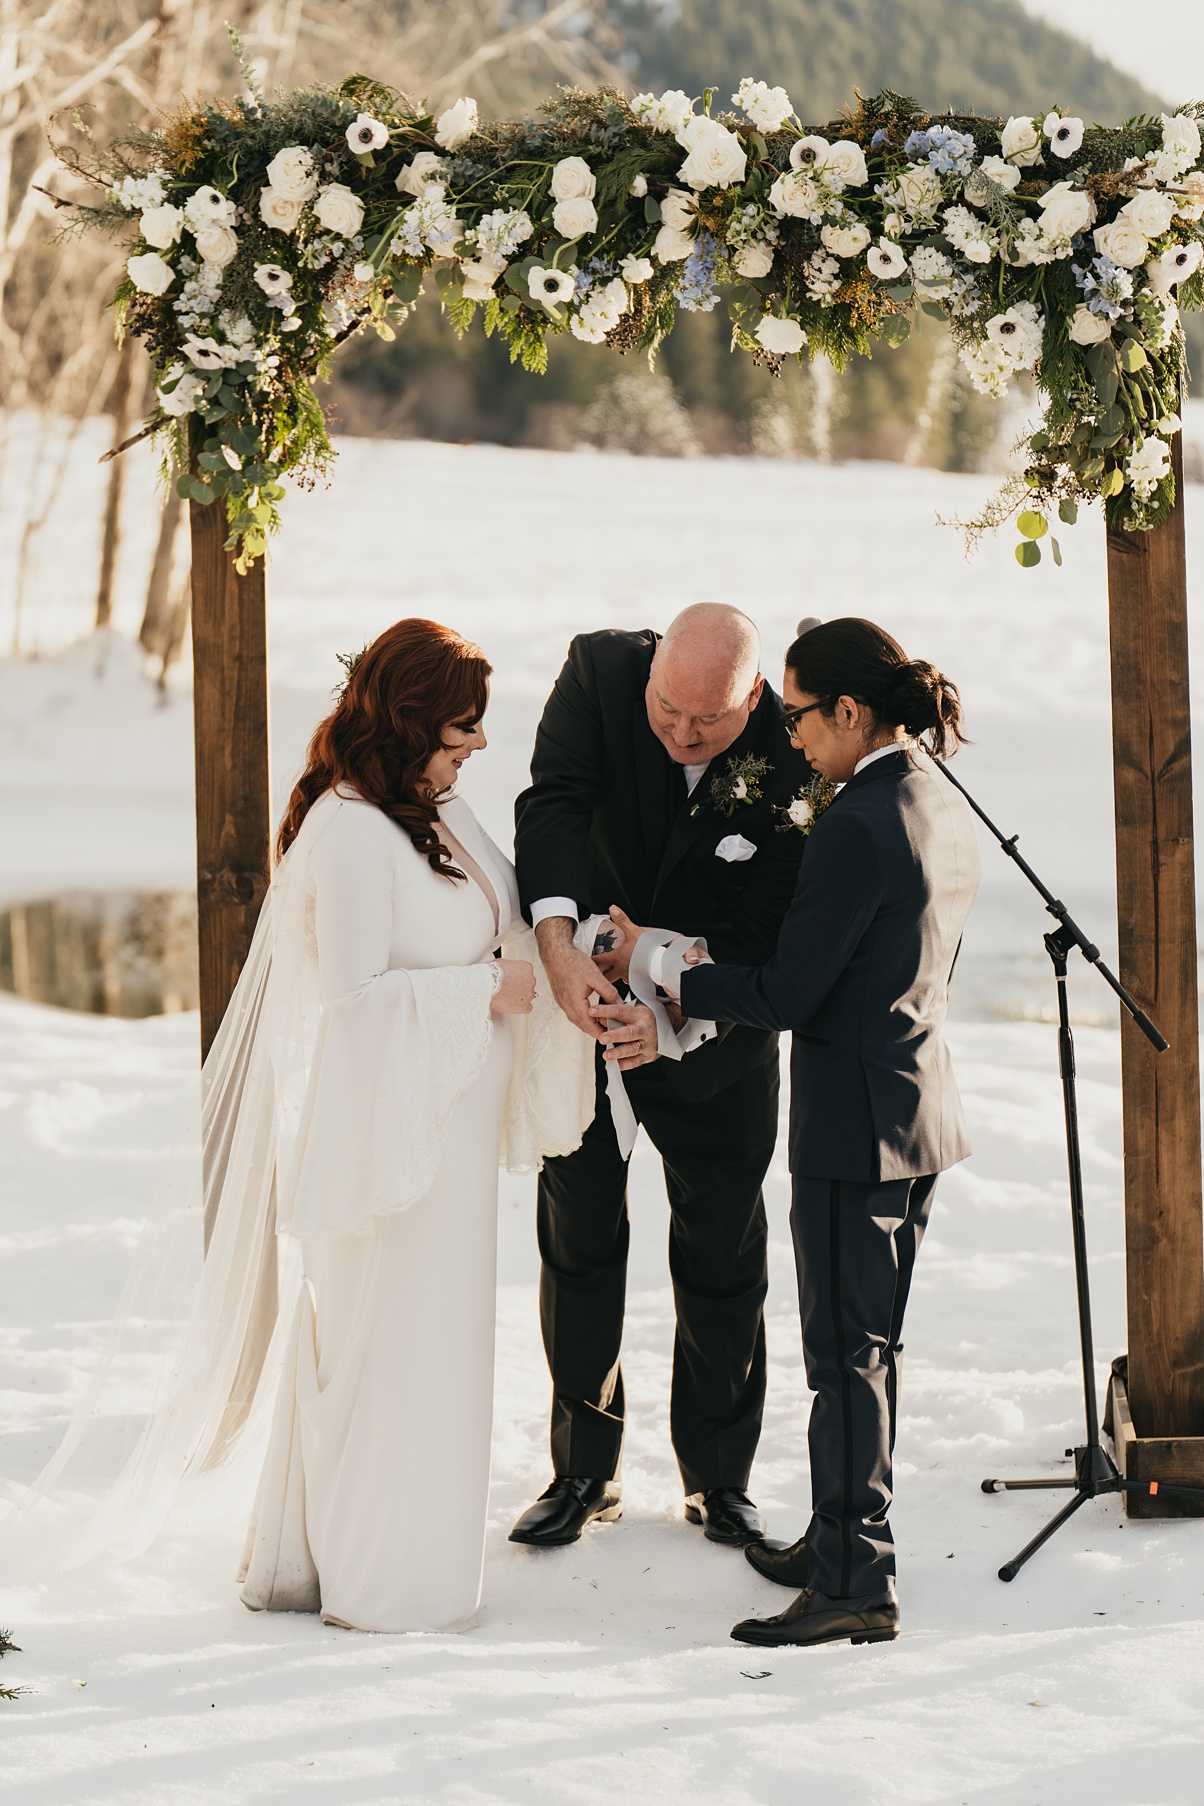 A couple completing their handfasting wedding ceremony at Mountain Springs Lodge